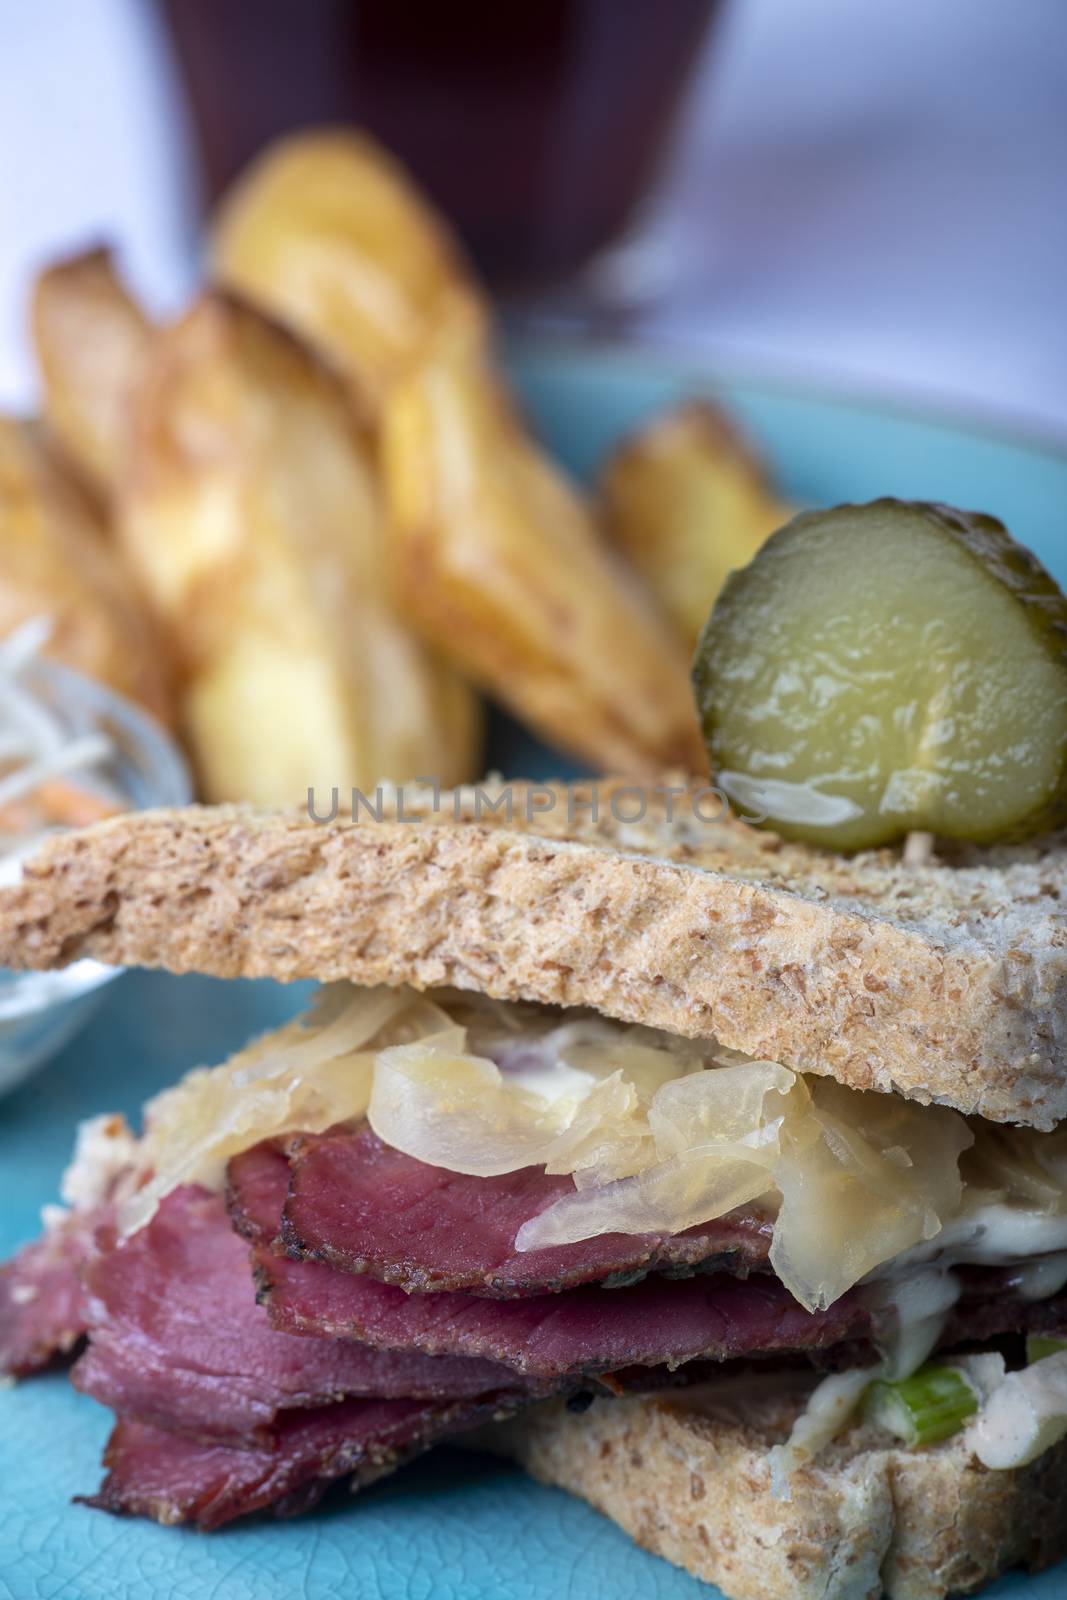 reuben sandwich on a plate with fries